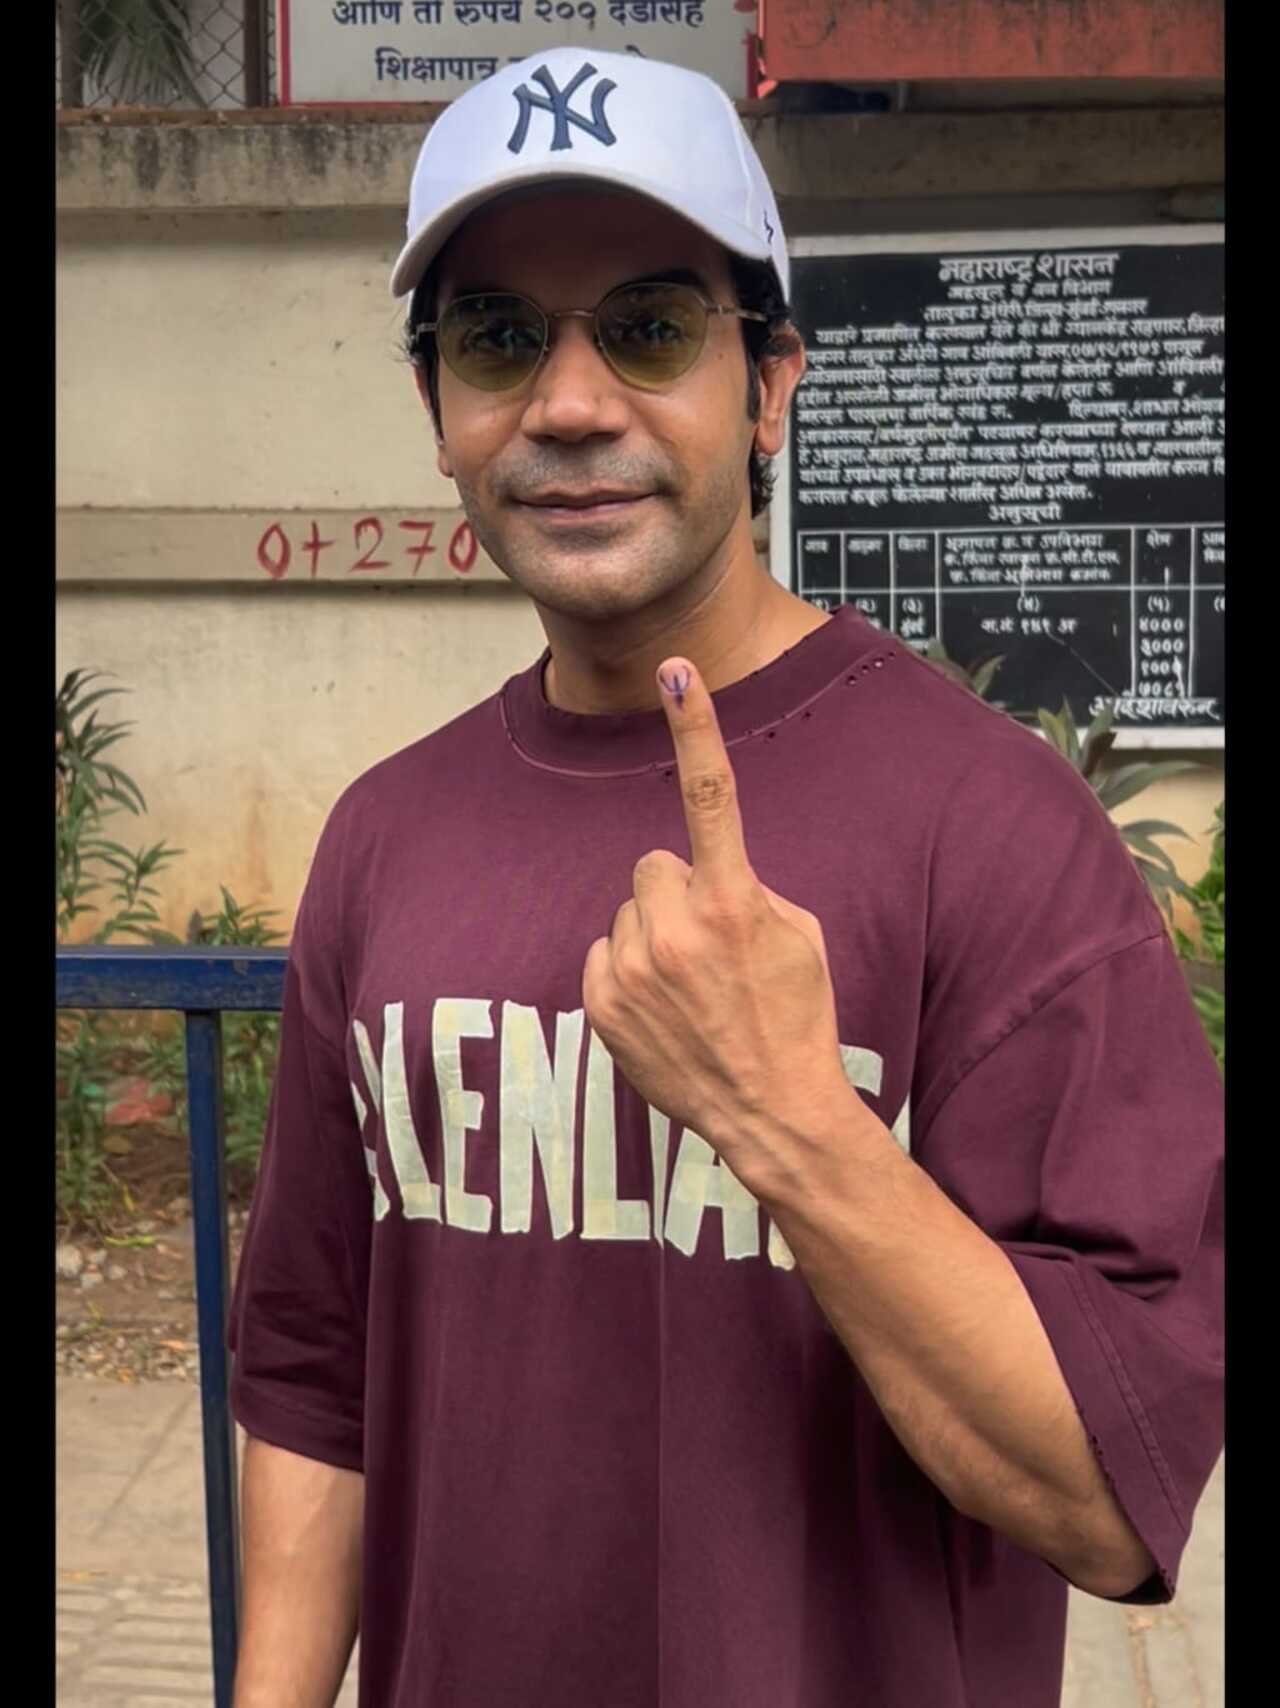 Actor Rajkummar Rao was also seen arriving at the polling booth on Monday morning